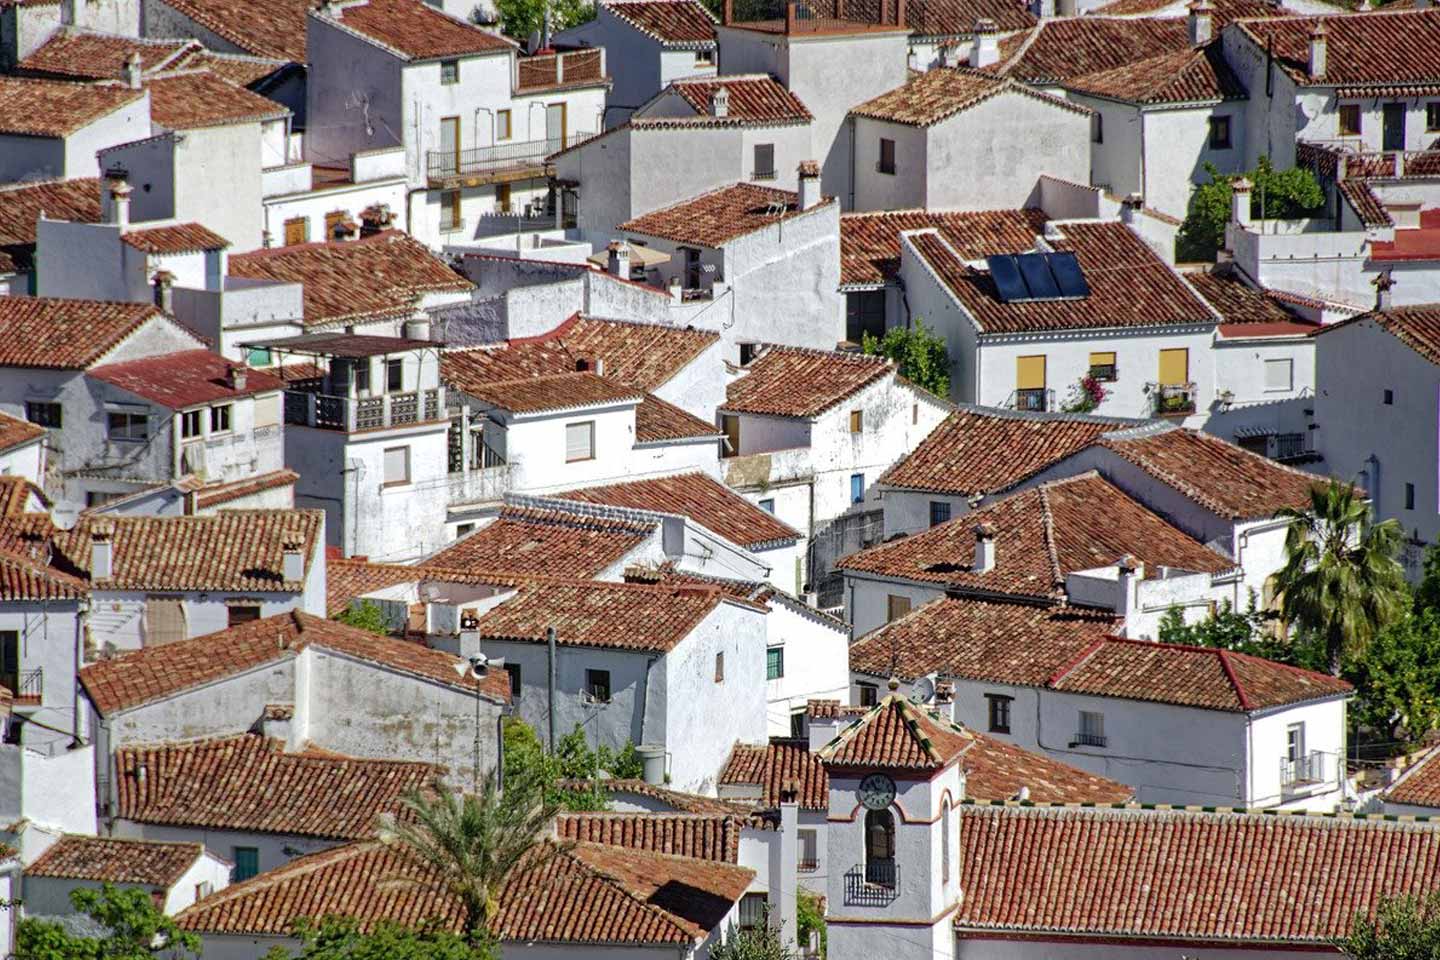 Whitewashed buildings in Malaga